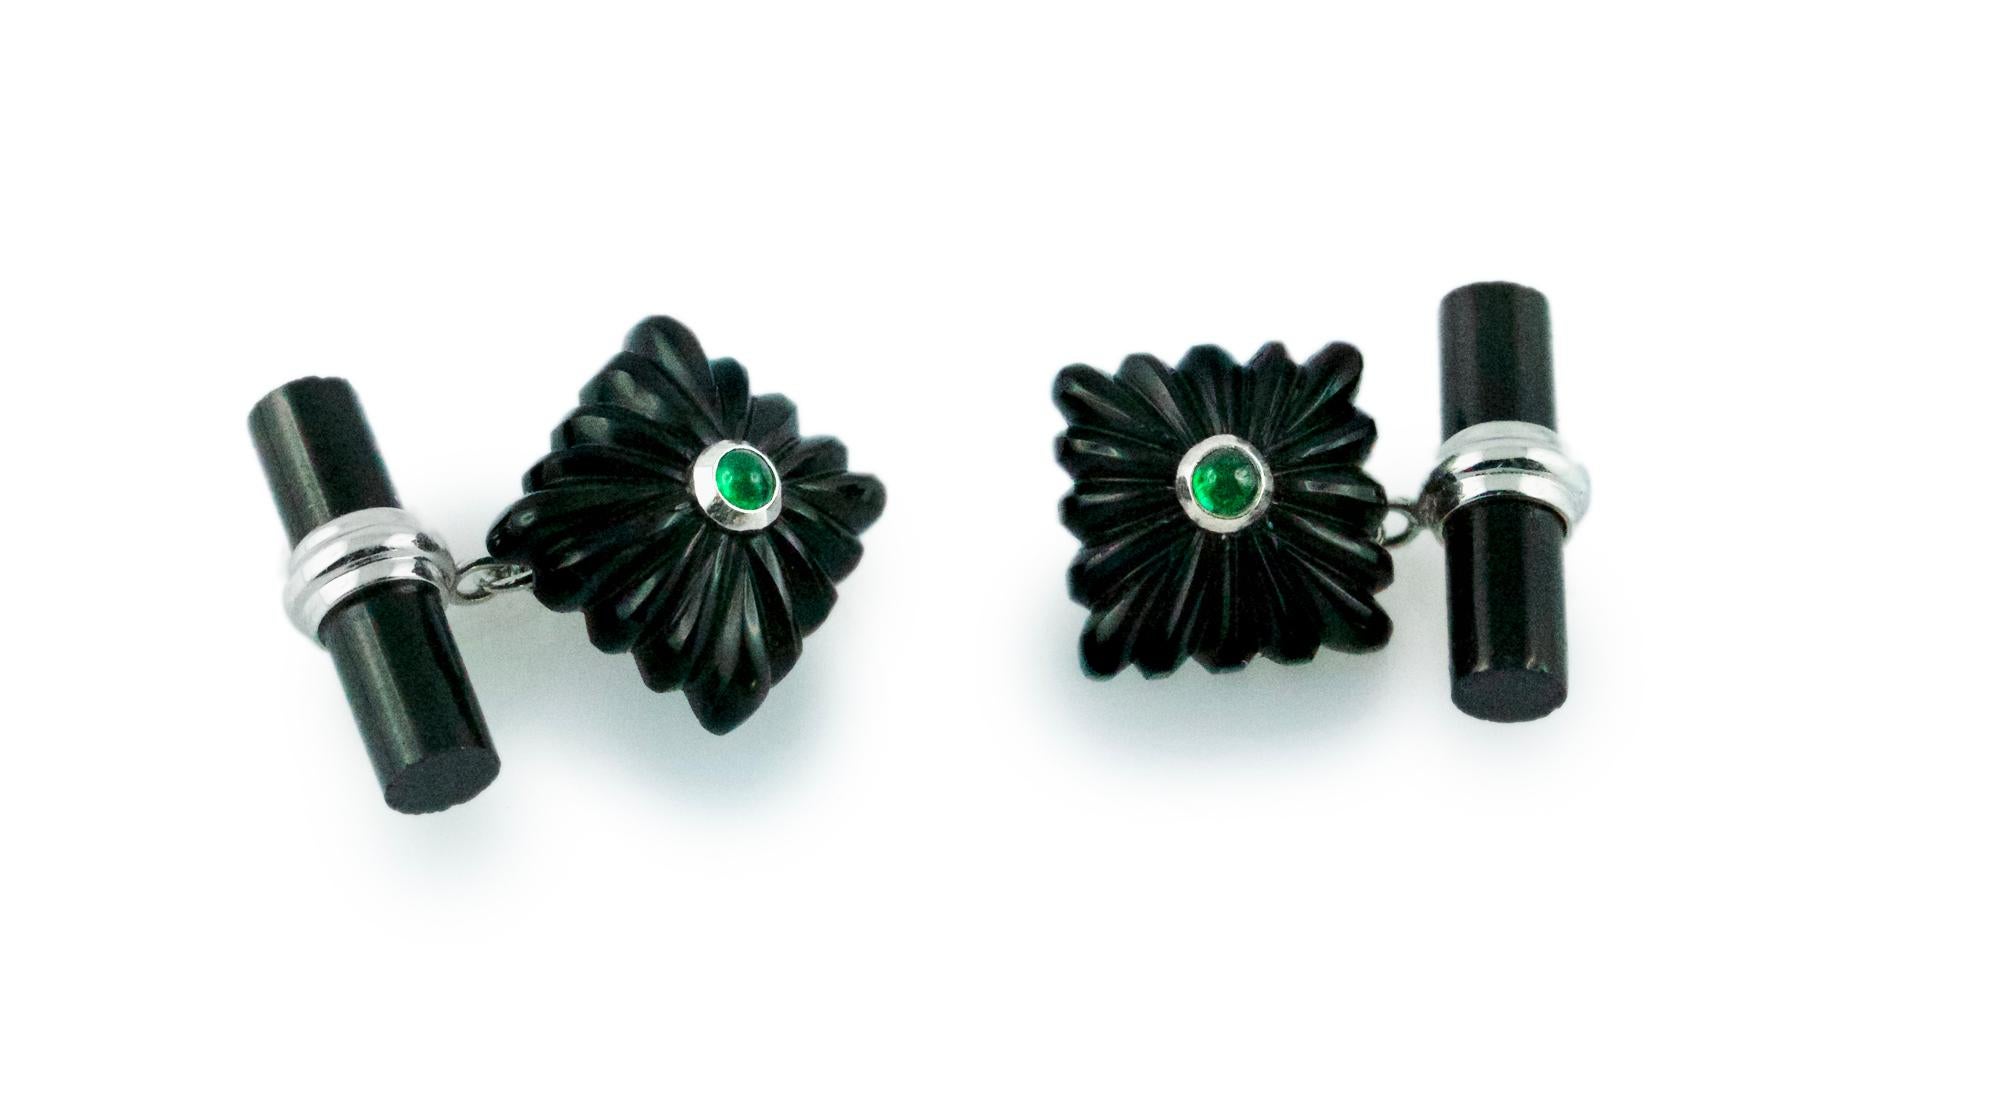 Striking and bold, this pair of cufflinks is made entirely in onyx. The toggle is a simple cylindrical bar, while the front face is shaped as a square with the classic “fesonato” texture. The center of the square is decorated with a cabochon emerald